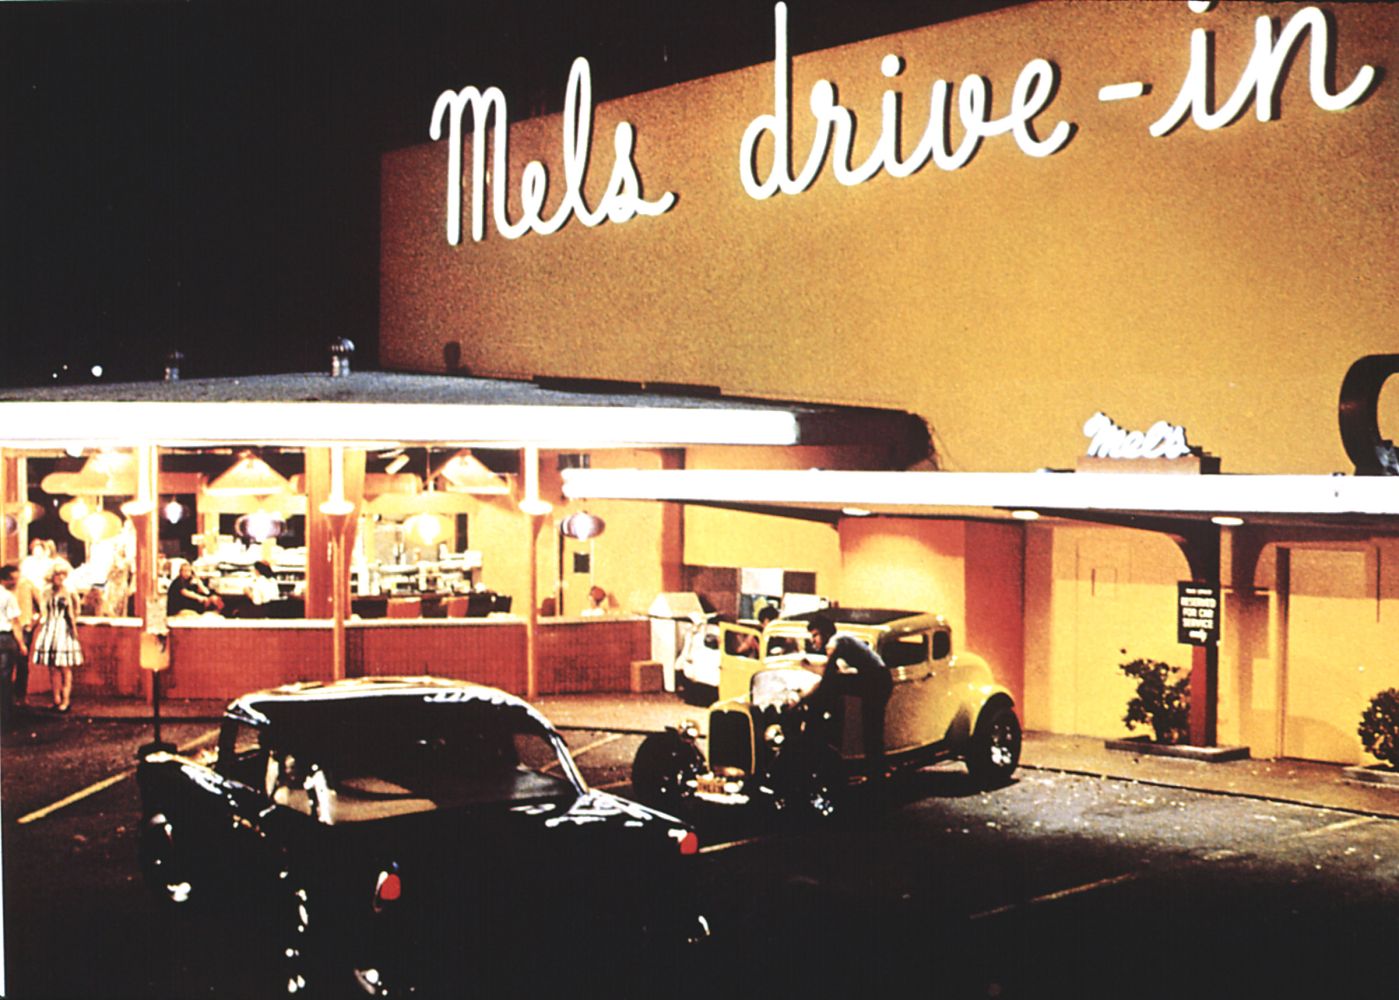 <p>Before he set his eyes on a galaxy far, far away, George Lucas looked back on his California adolescence with this classic ensemble piece about teenagers cruising on the last night of summer.</p> <p>‘American Graffiti’ was groundbreaking for introducing a wave of 1950s nostalgia that came to dominate American pop culture in the 1970s and 80s, paving the way for hits like ‘Happy Days’ and ‘Grease.’ But even without that context, it stands out as a quintessential coming-of-age story that shows Lucas’ genuine filmmaking talent was never limited to his blockbuster projects. Plus it launched the acting career of Harrison Ford, who went on to re-team with Lucas once or twice…</p>